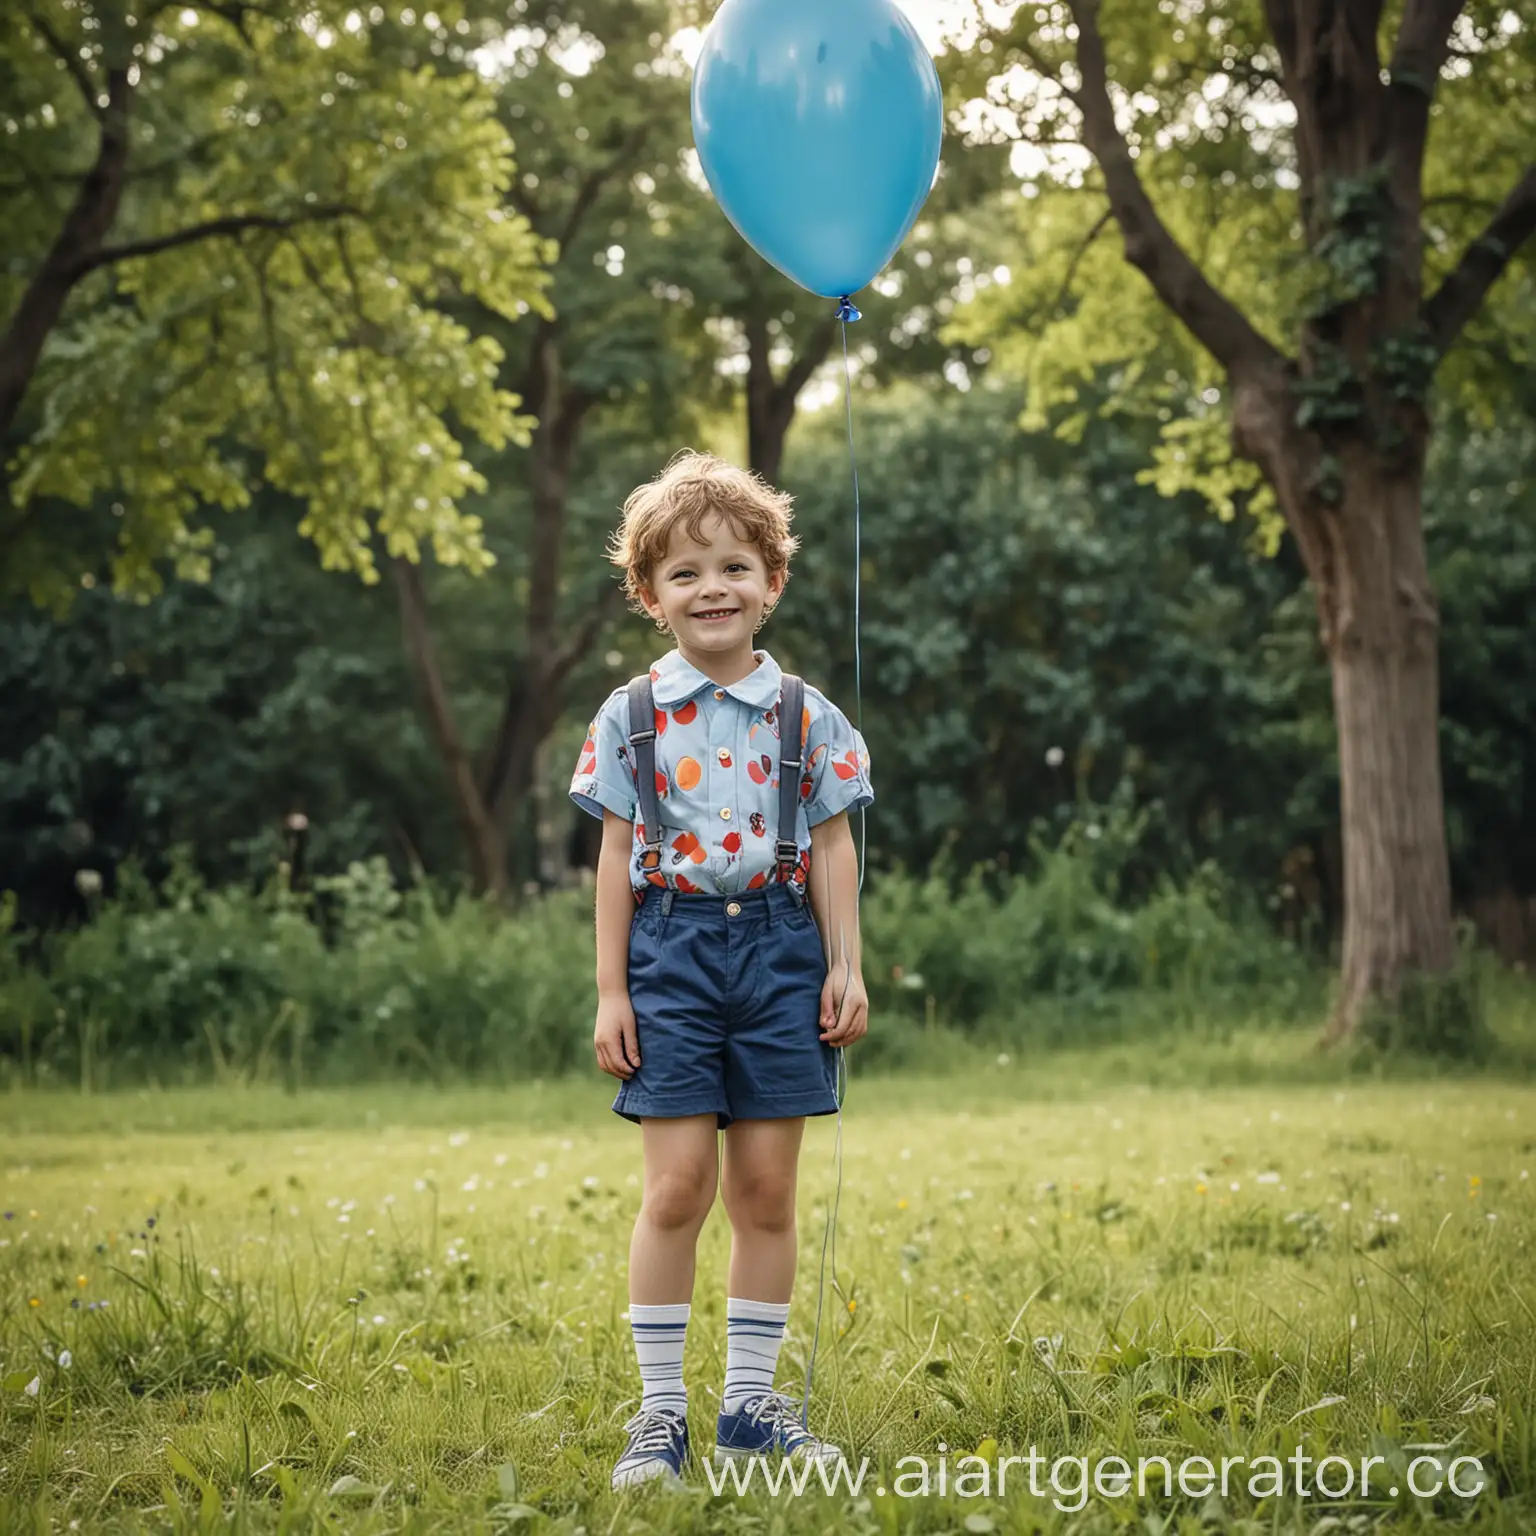 Summer-Park-Scene-Happy-4YearOld-Boy-with-Clown-and-Balloon